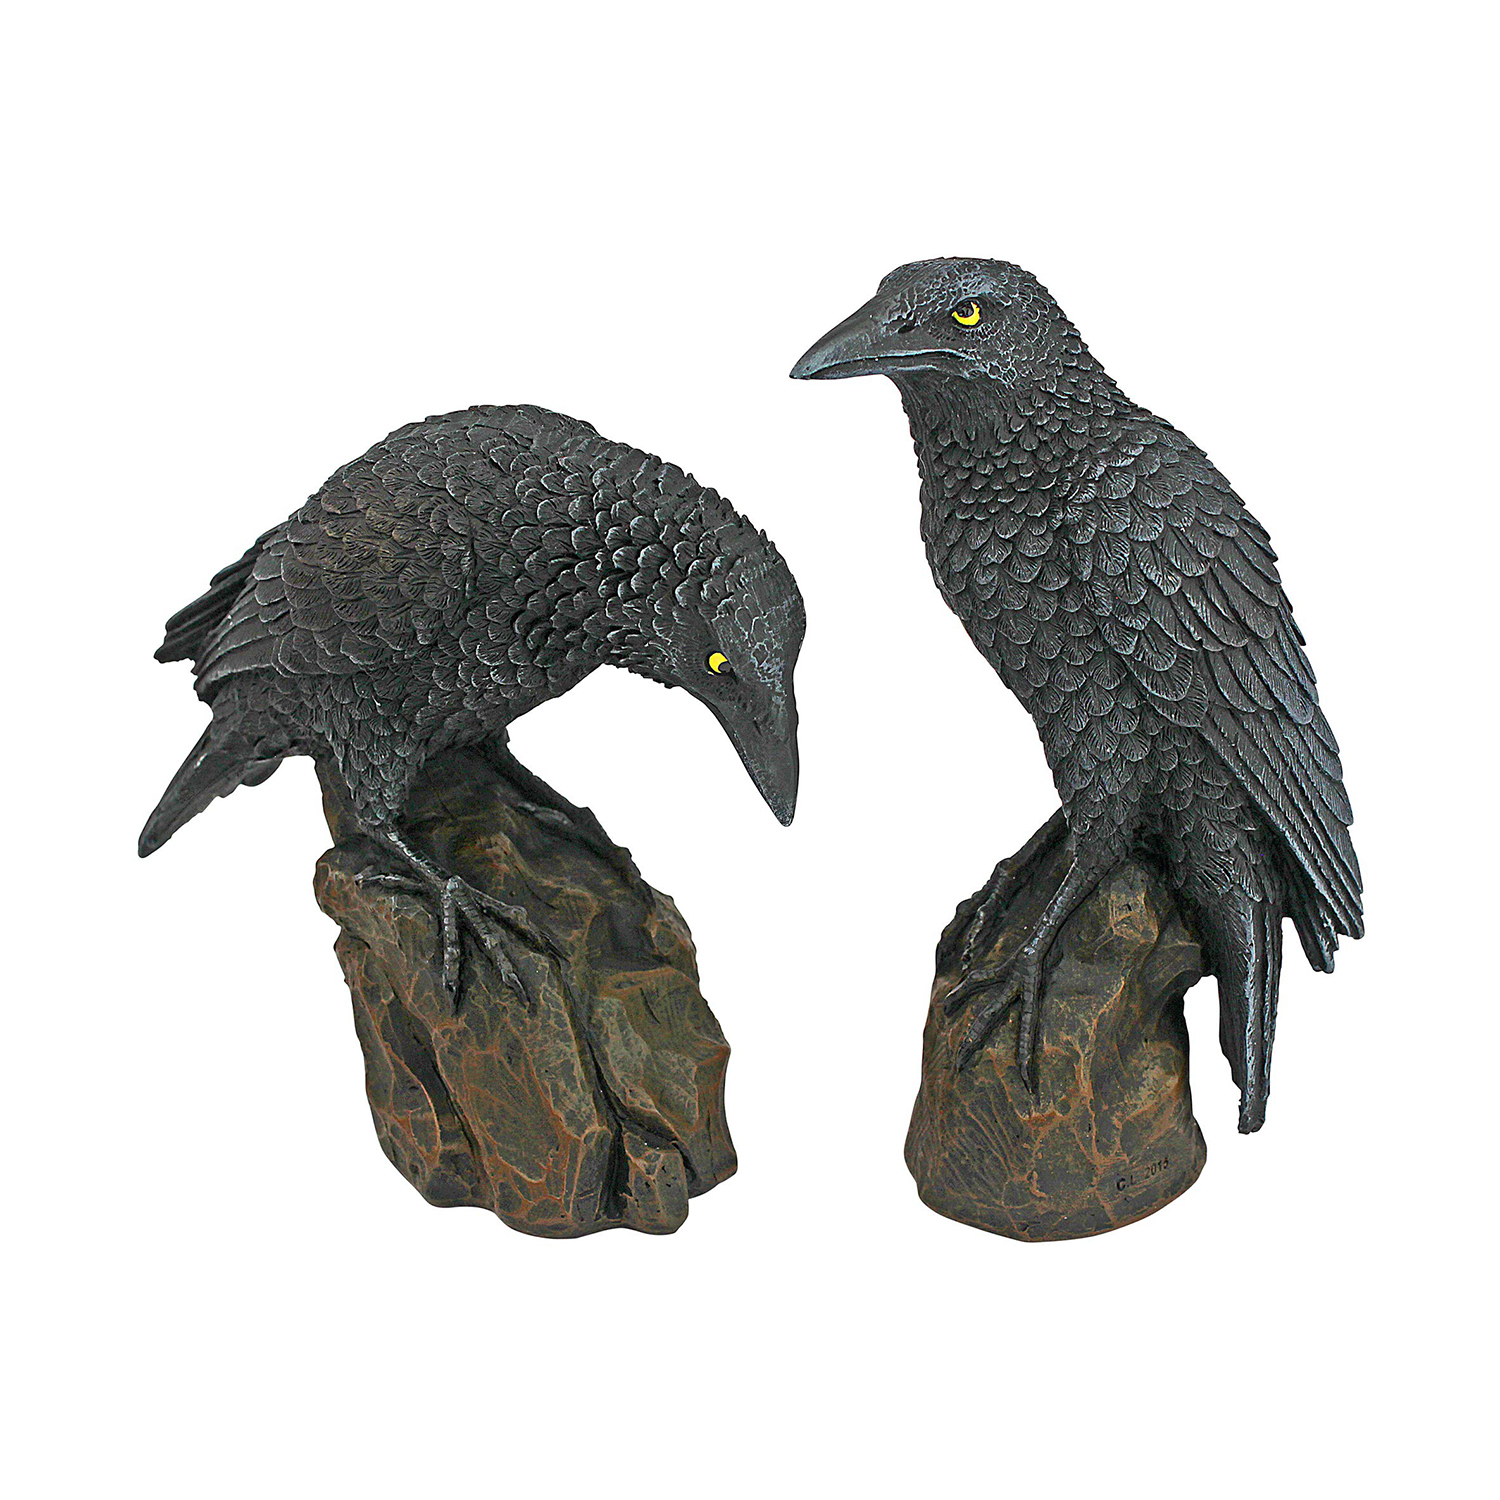 Raven Statues for Sale